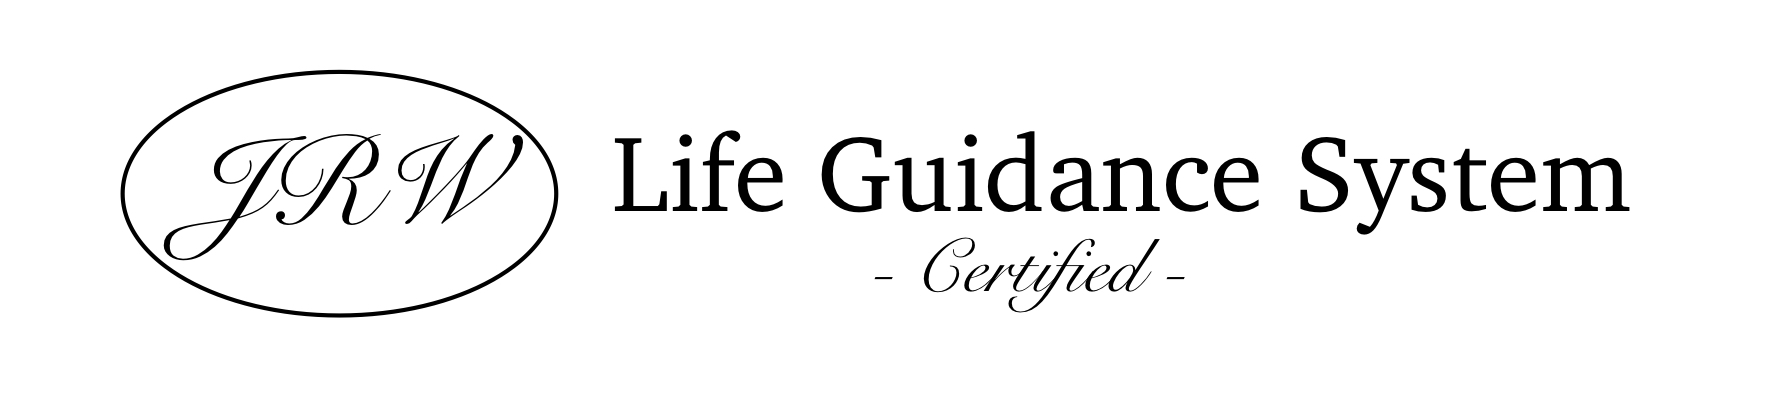 Certified In The JRW Life Guidance System